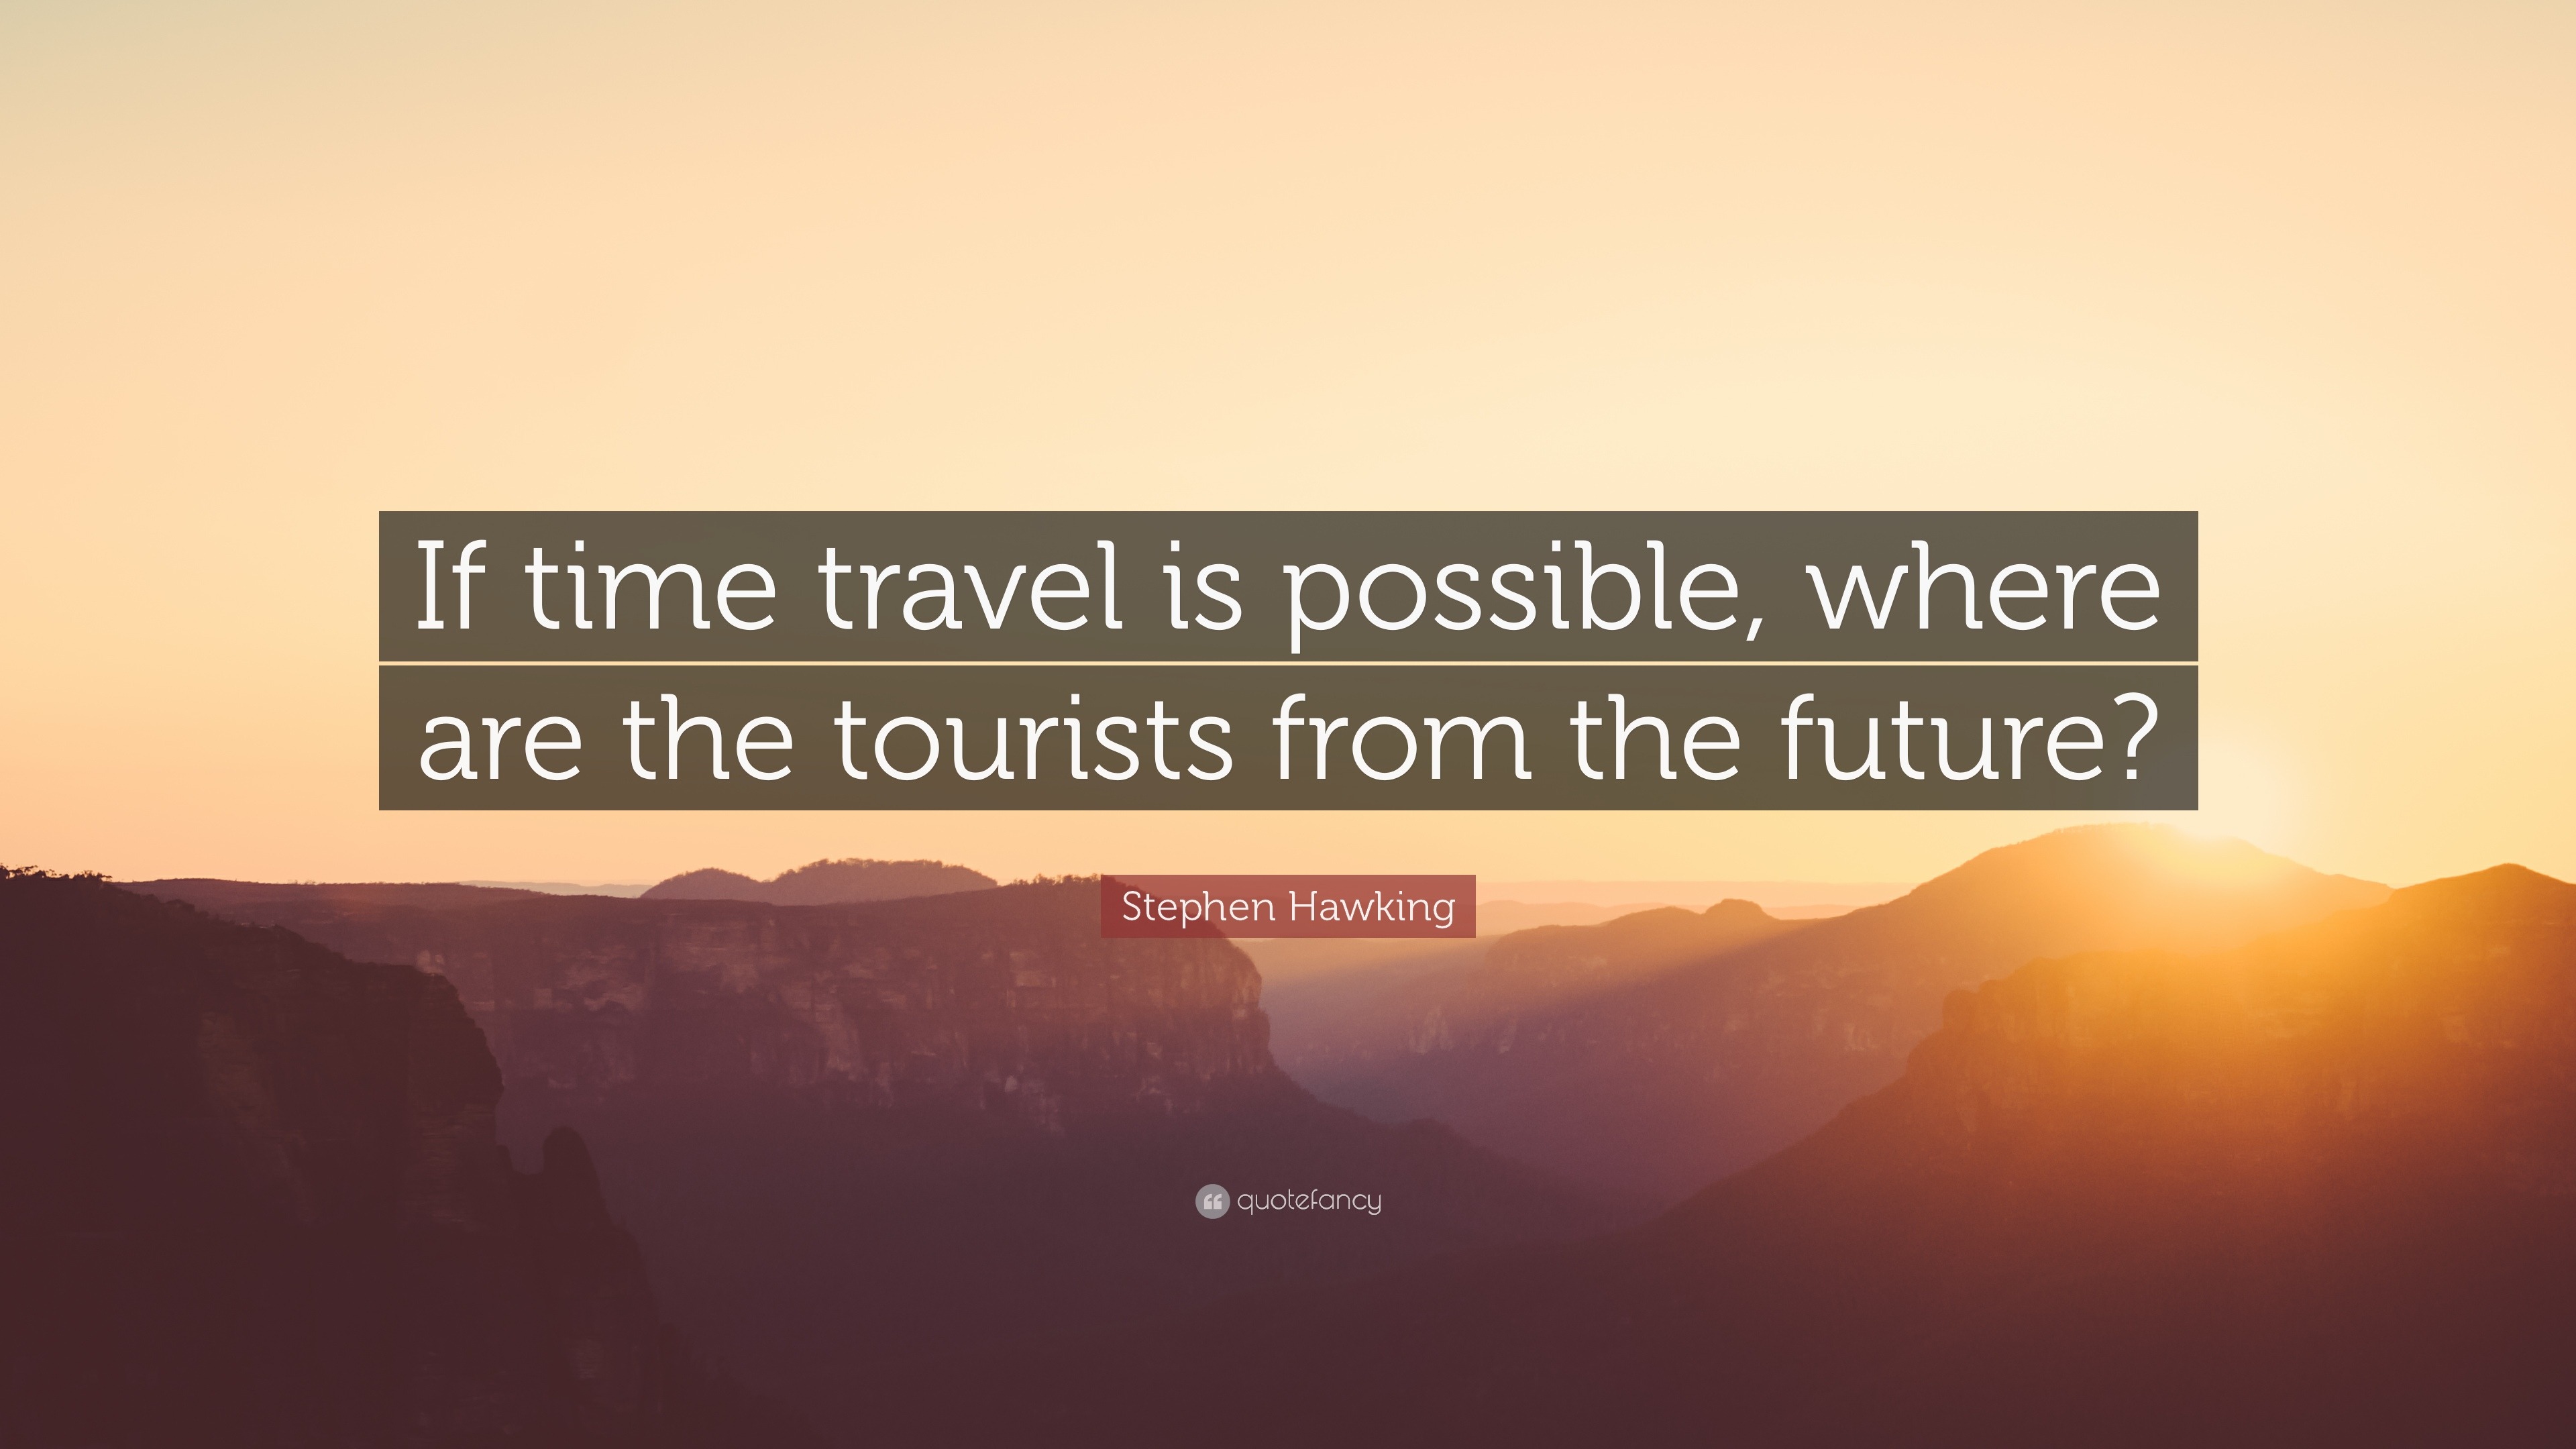 Stephen Hawking Quote: “If time travel is possible, where ...